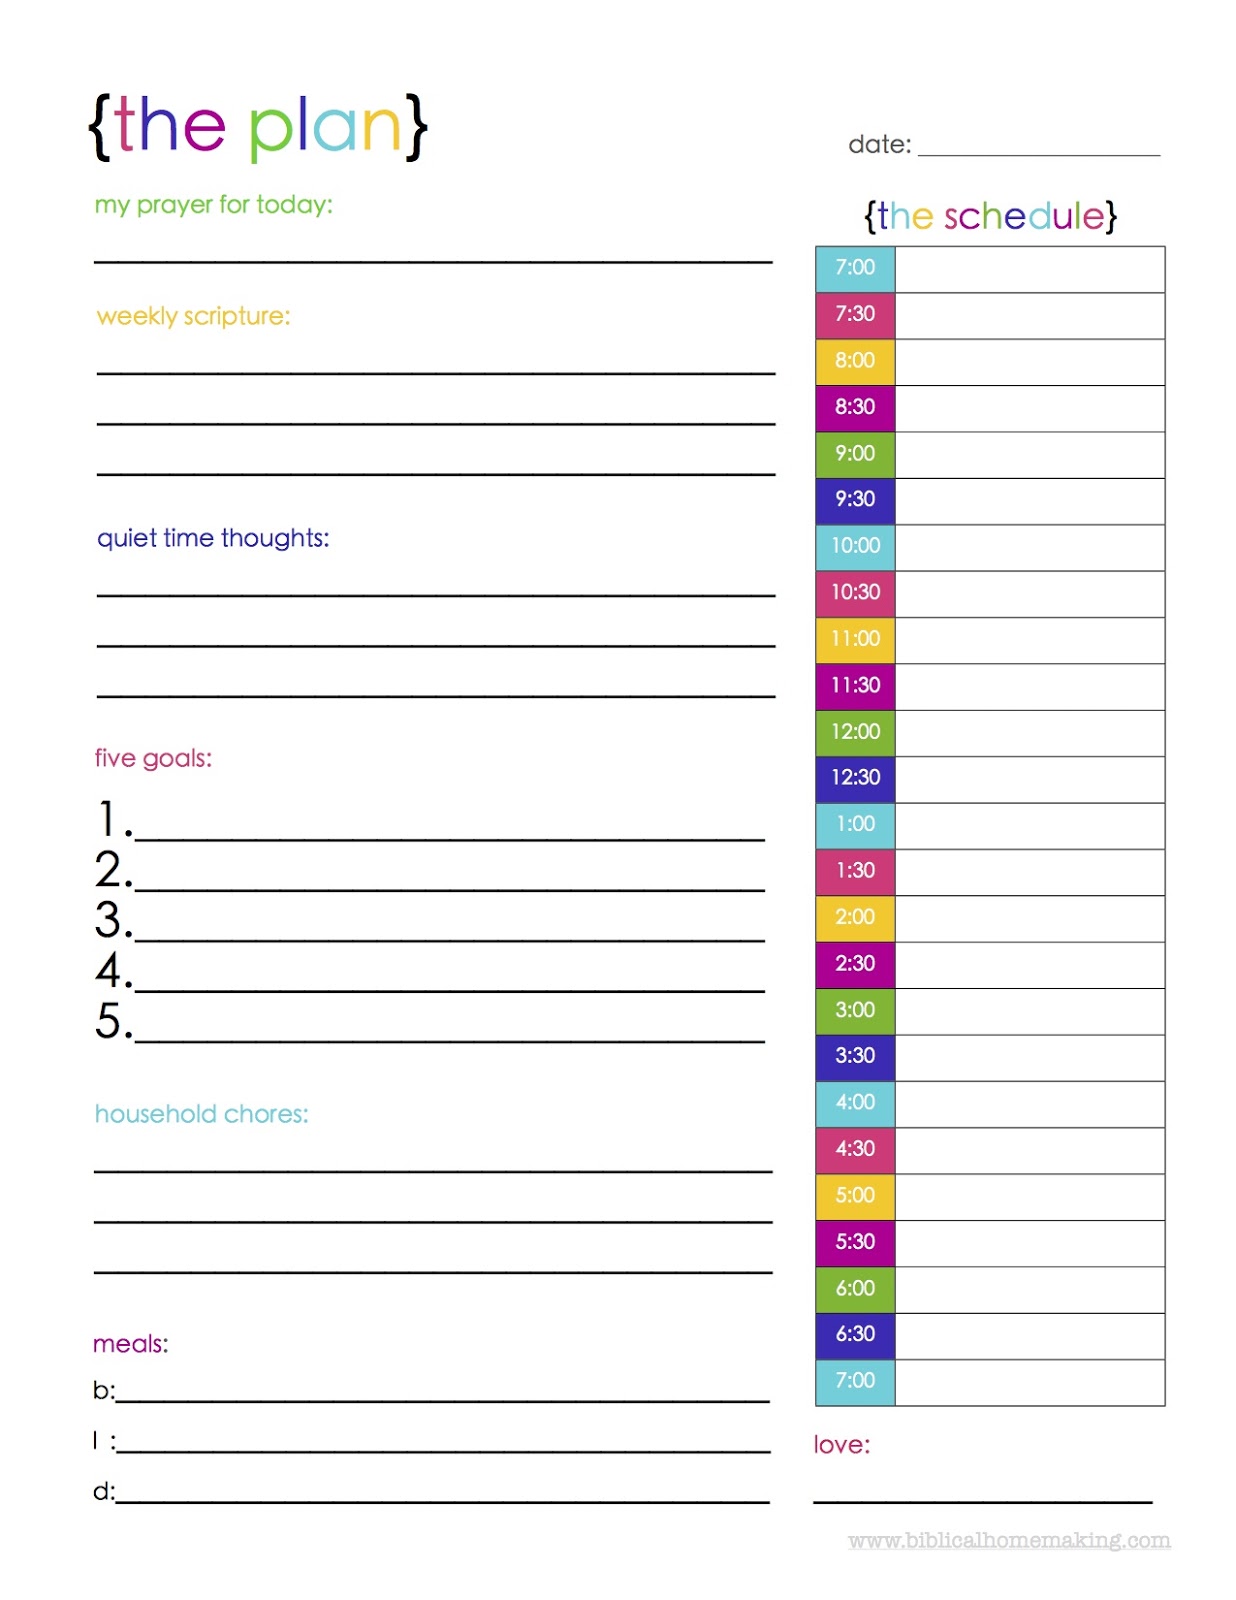 {the plan}: a colorful free daily planner printable - Biblical Homemaking